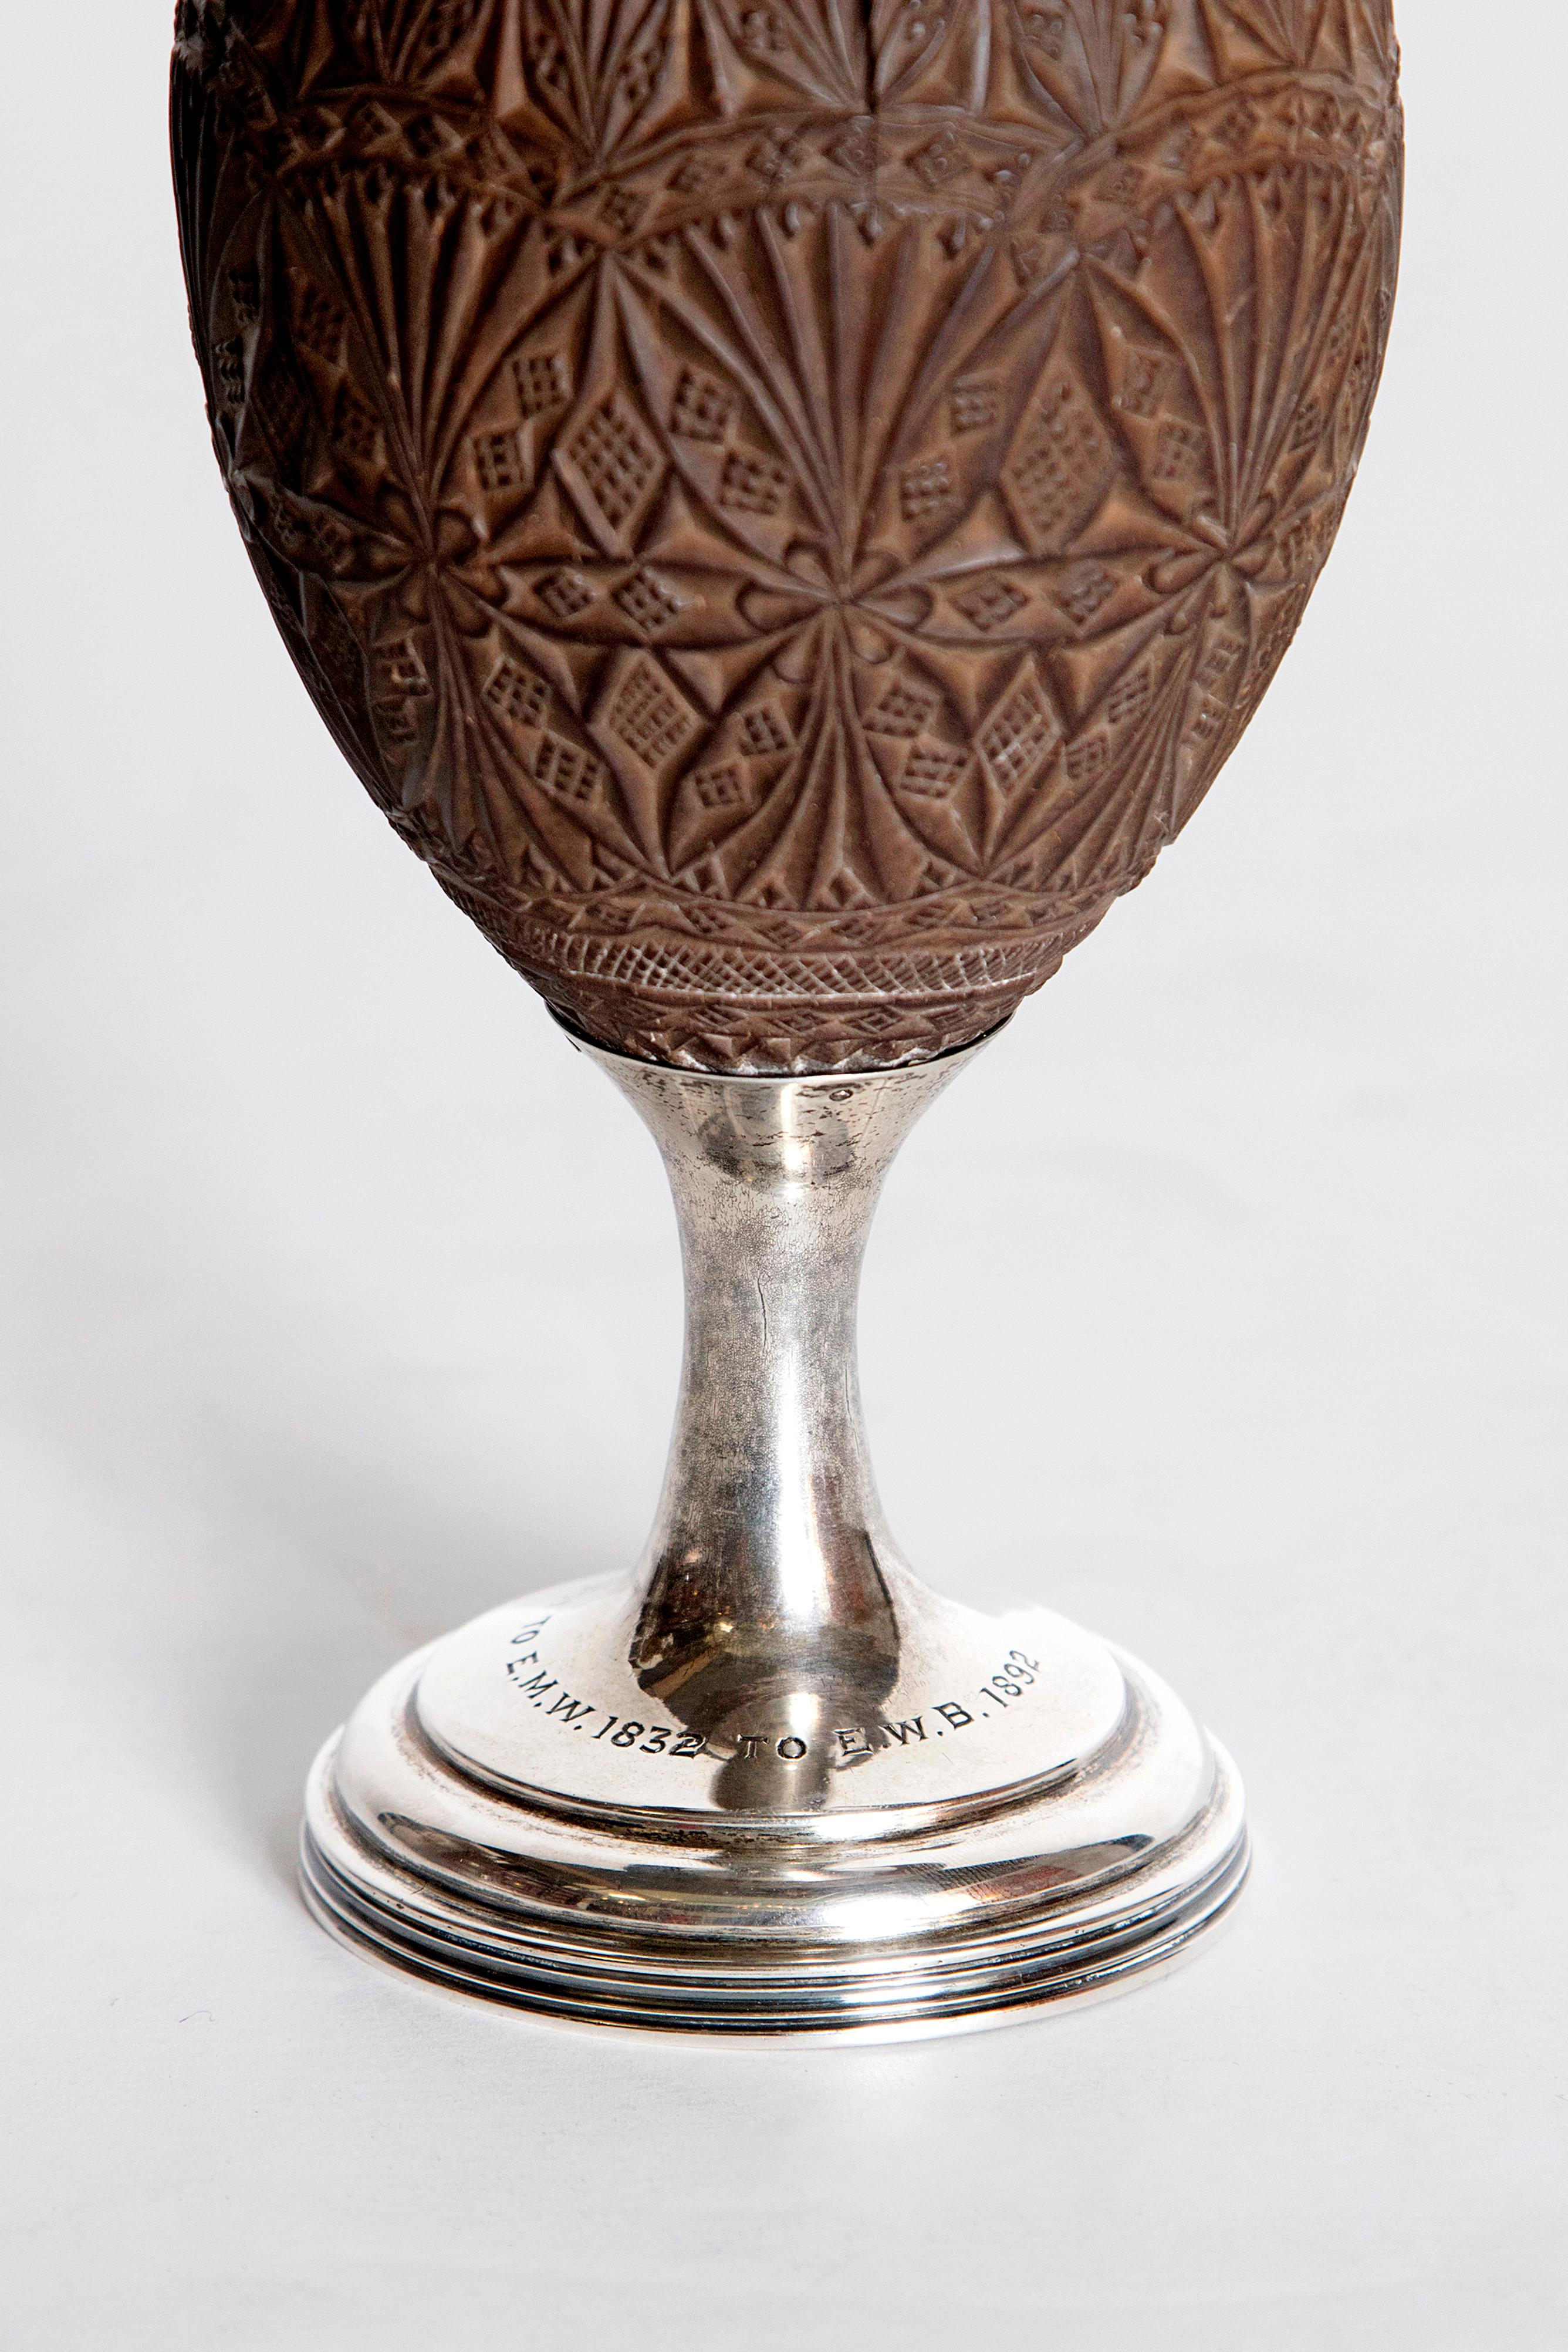 Late 18th Century Geroge III Coconut and Silver Goblet by Charles Hougham For Sale 1